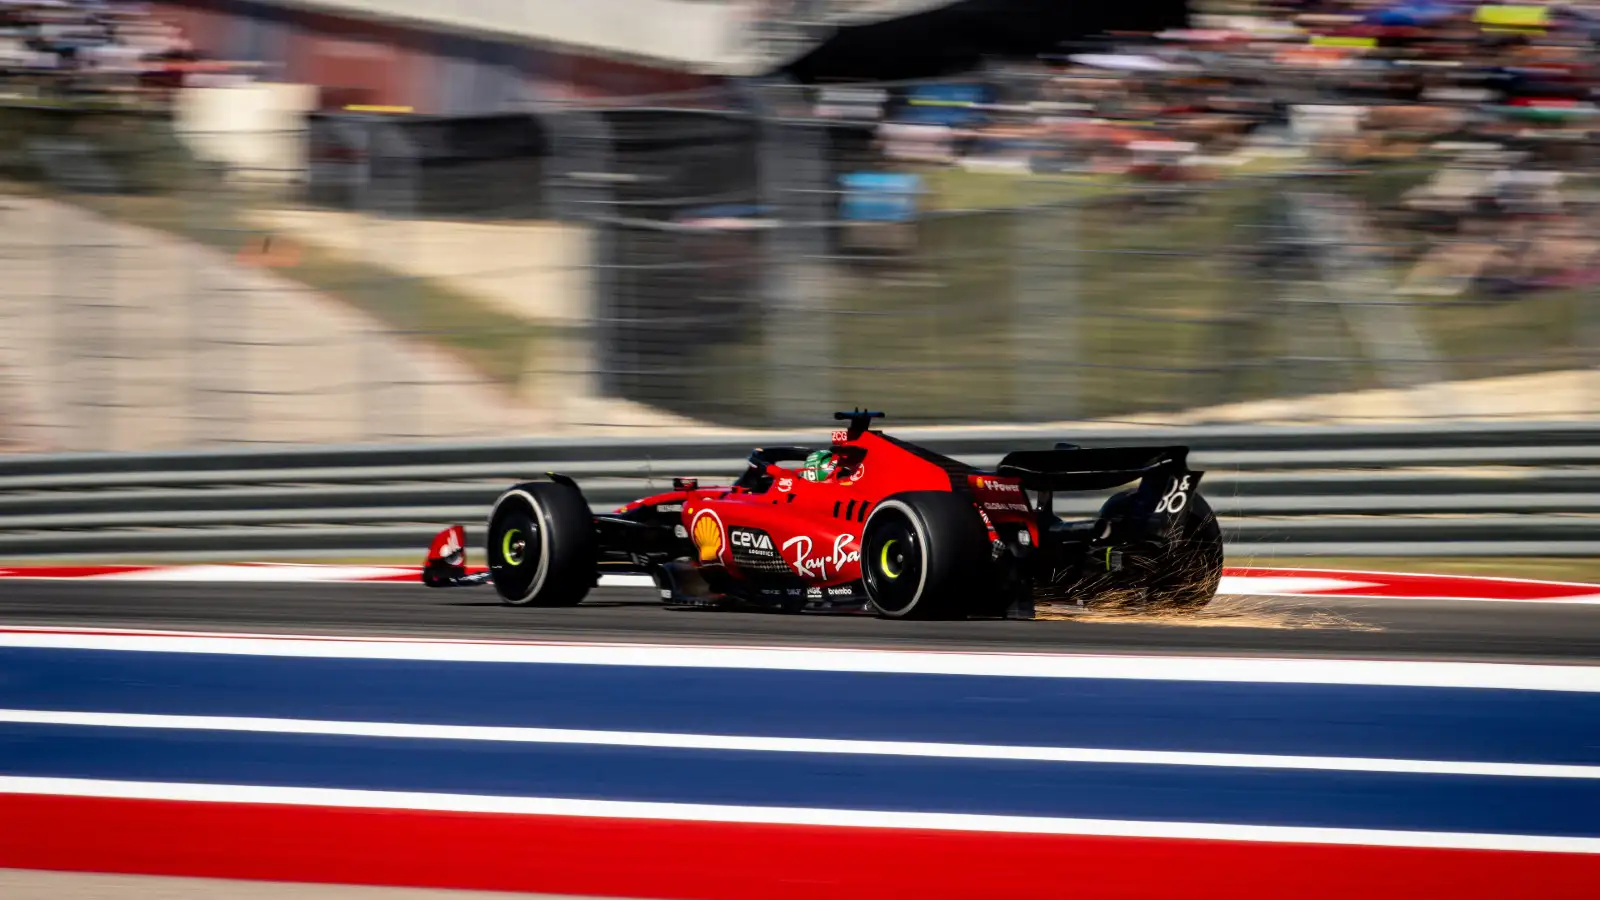 Sparks fly from under Charles Leclerc's Ferrari over the United States GP weekend at the Circuit of the Americas.